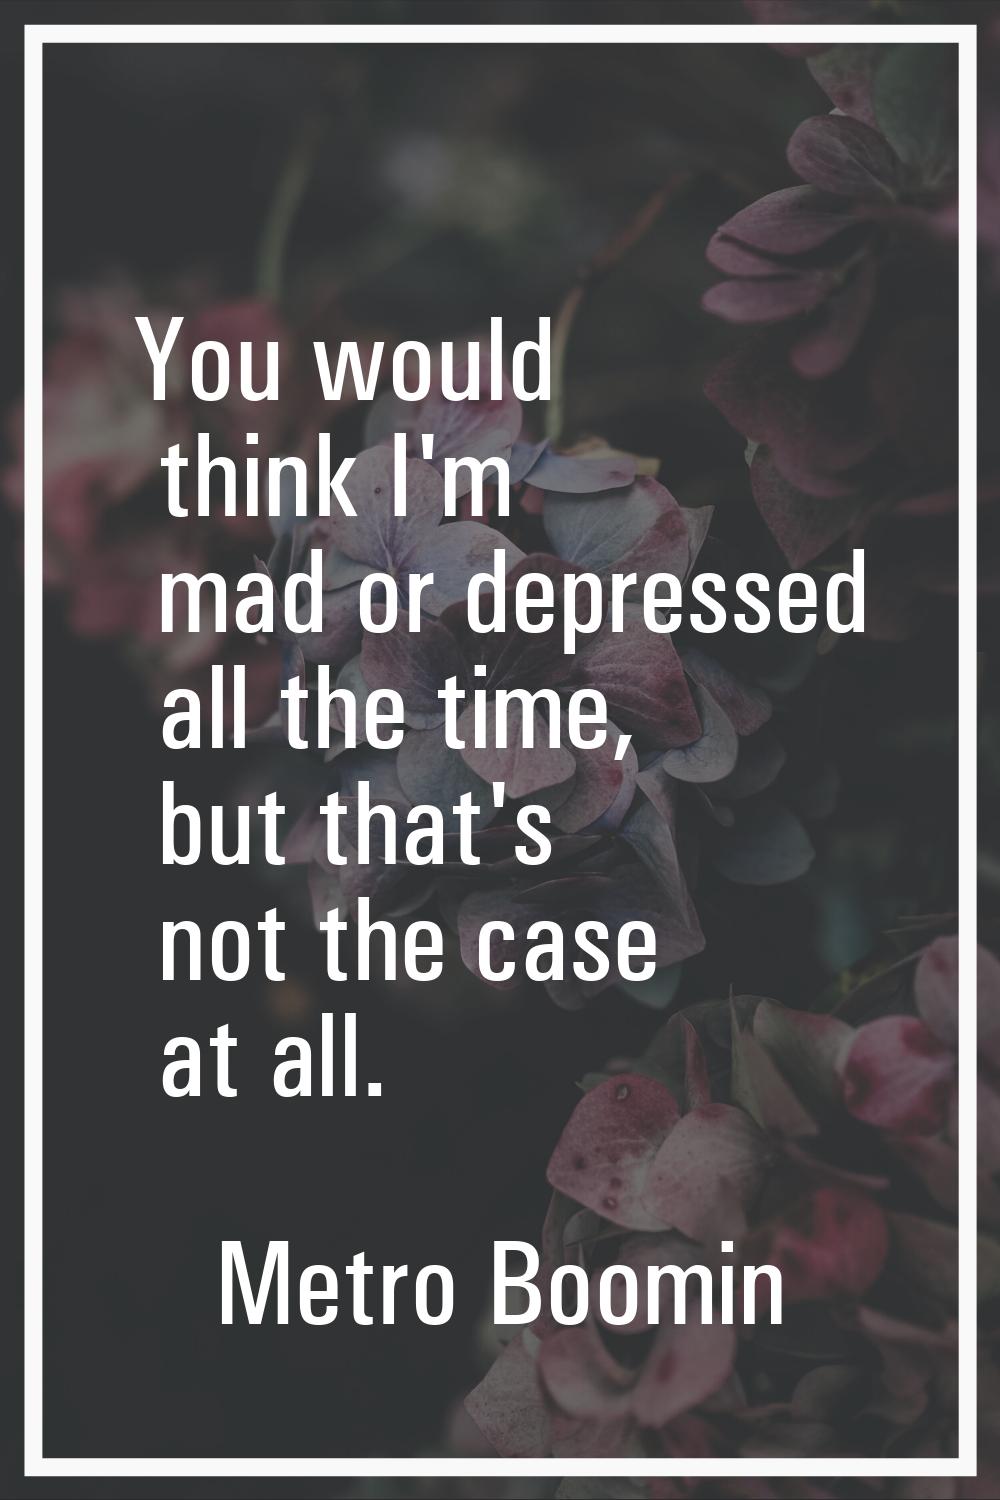 You would think I'm mad or depressed all the time, but that's not the case at all.